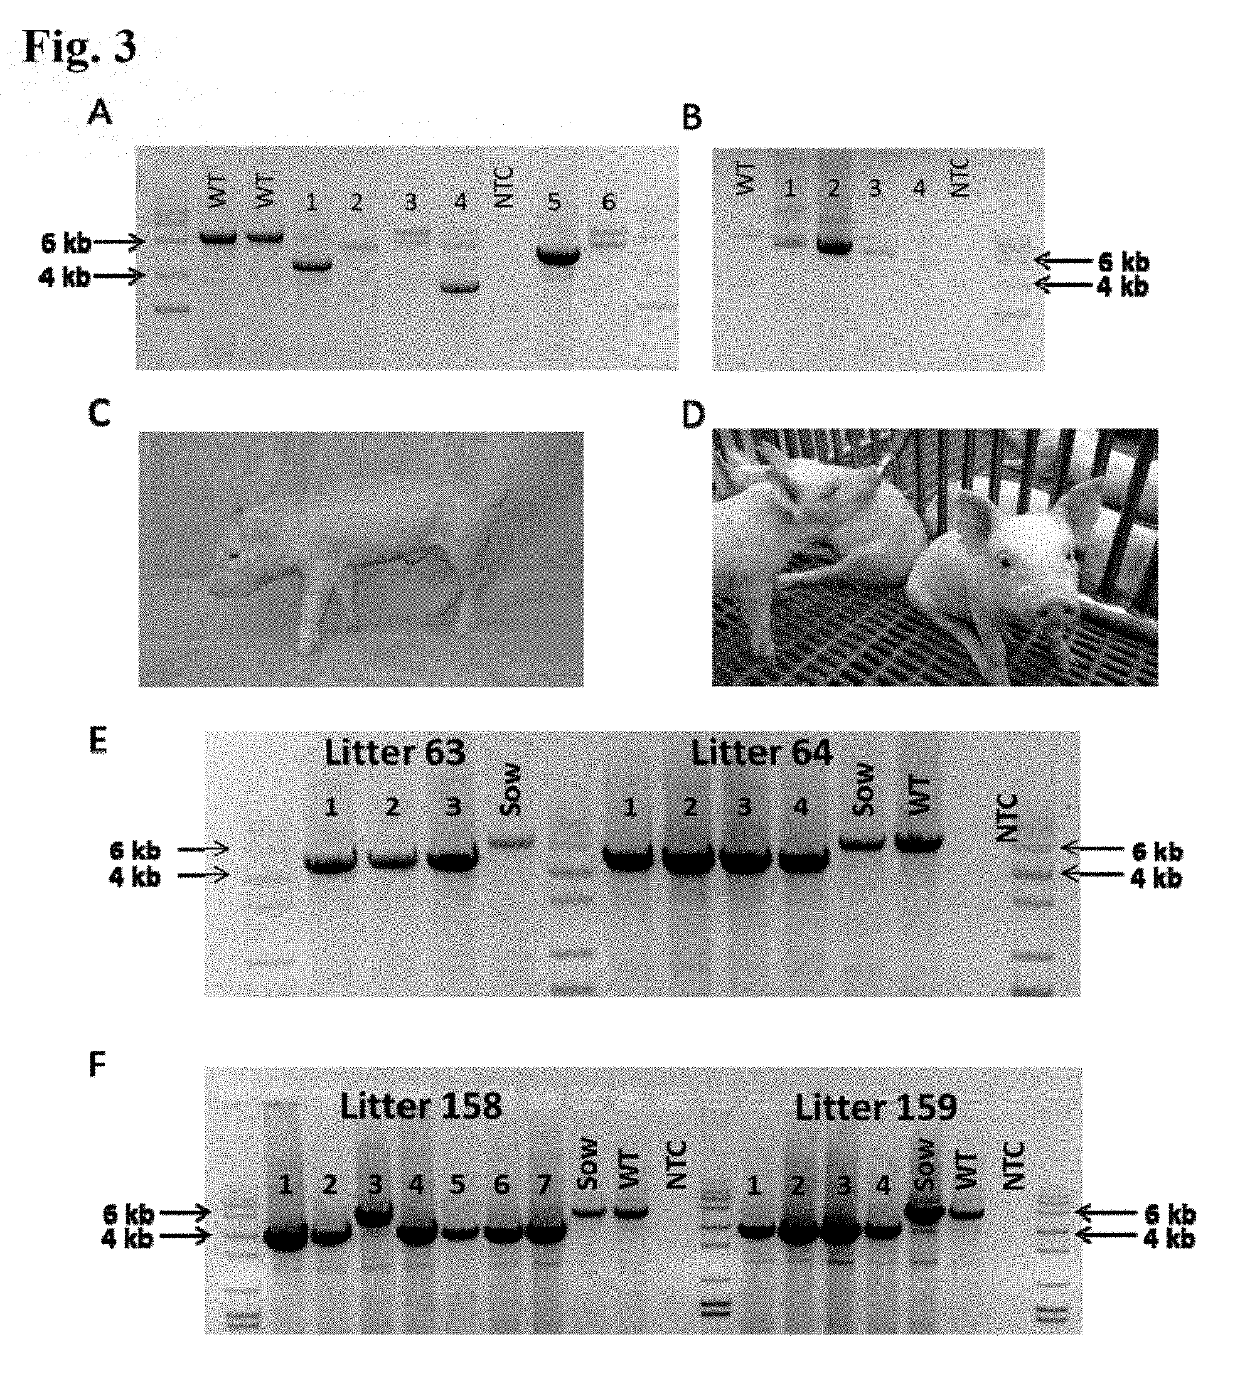 Methods for protecting porcine fetuses from infection with porcine reproductive and respiratory syndrome virus (PRRSV)